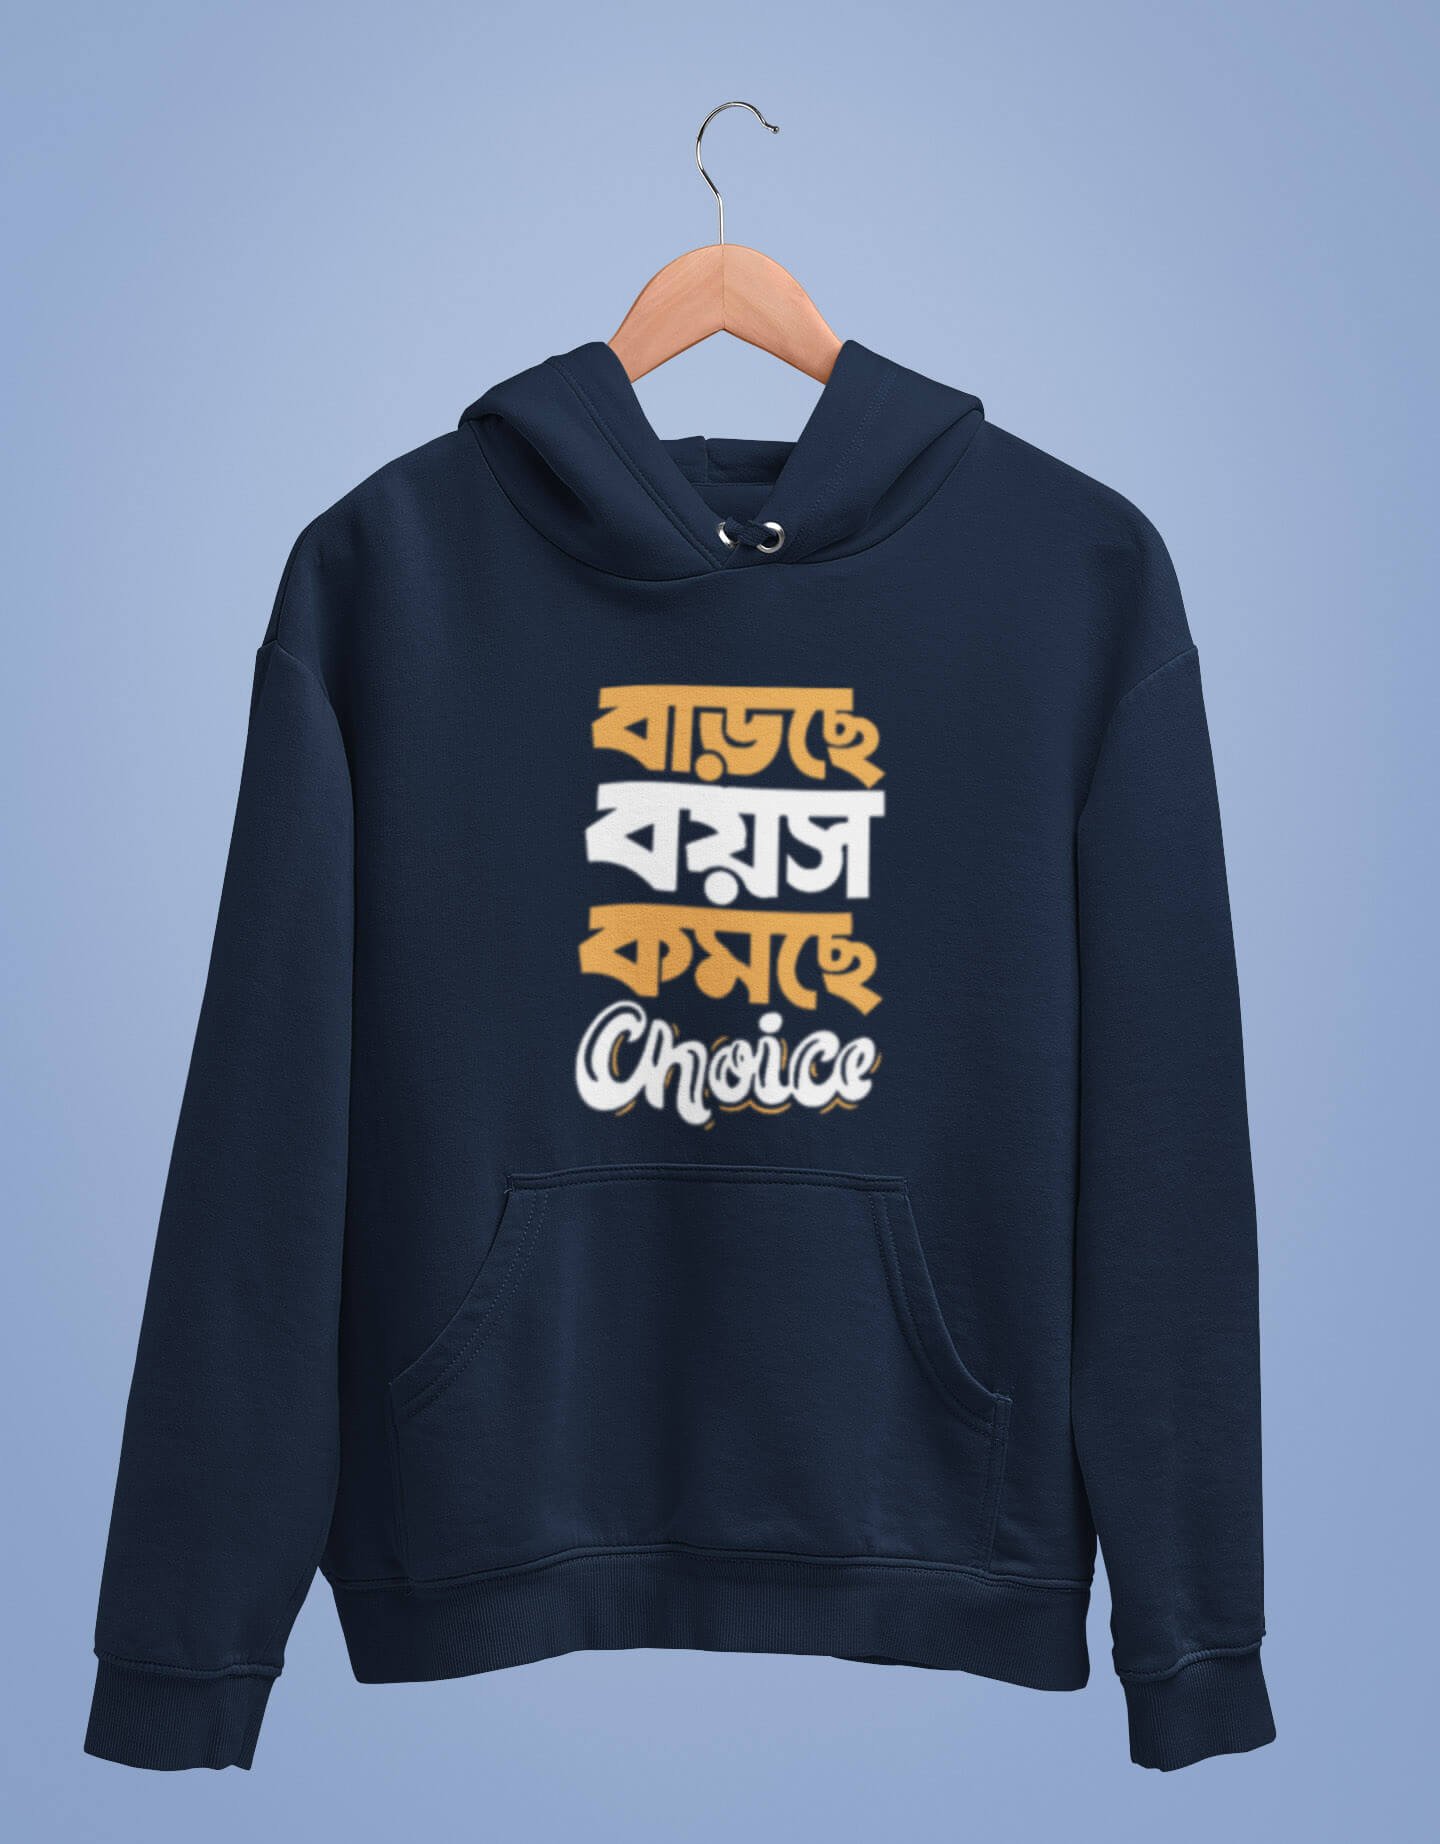 Barche boyesh komche choice hoodie (6 colour options available)